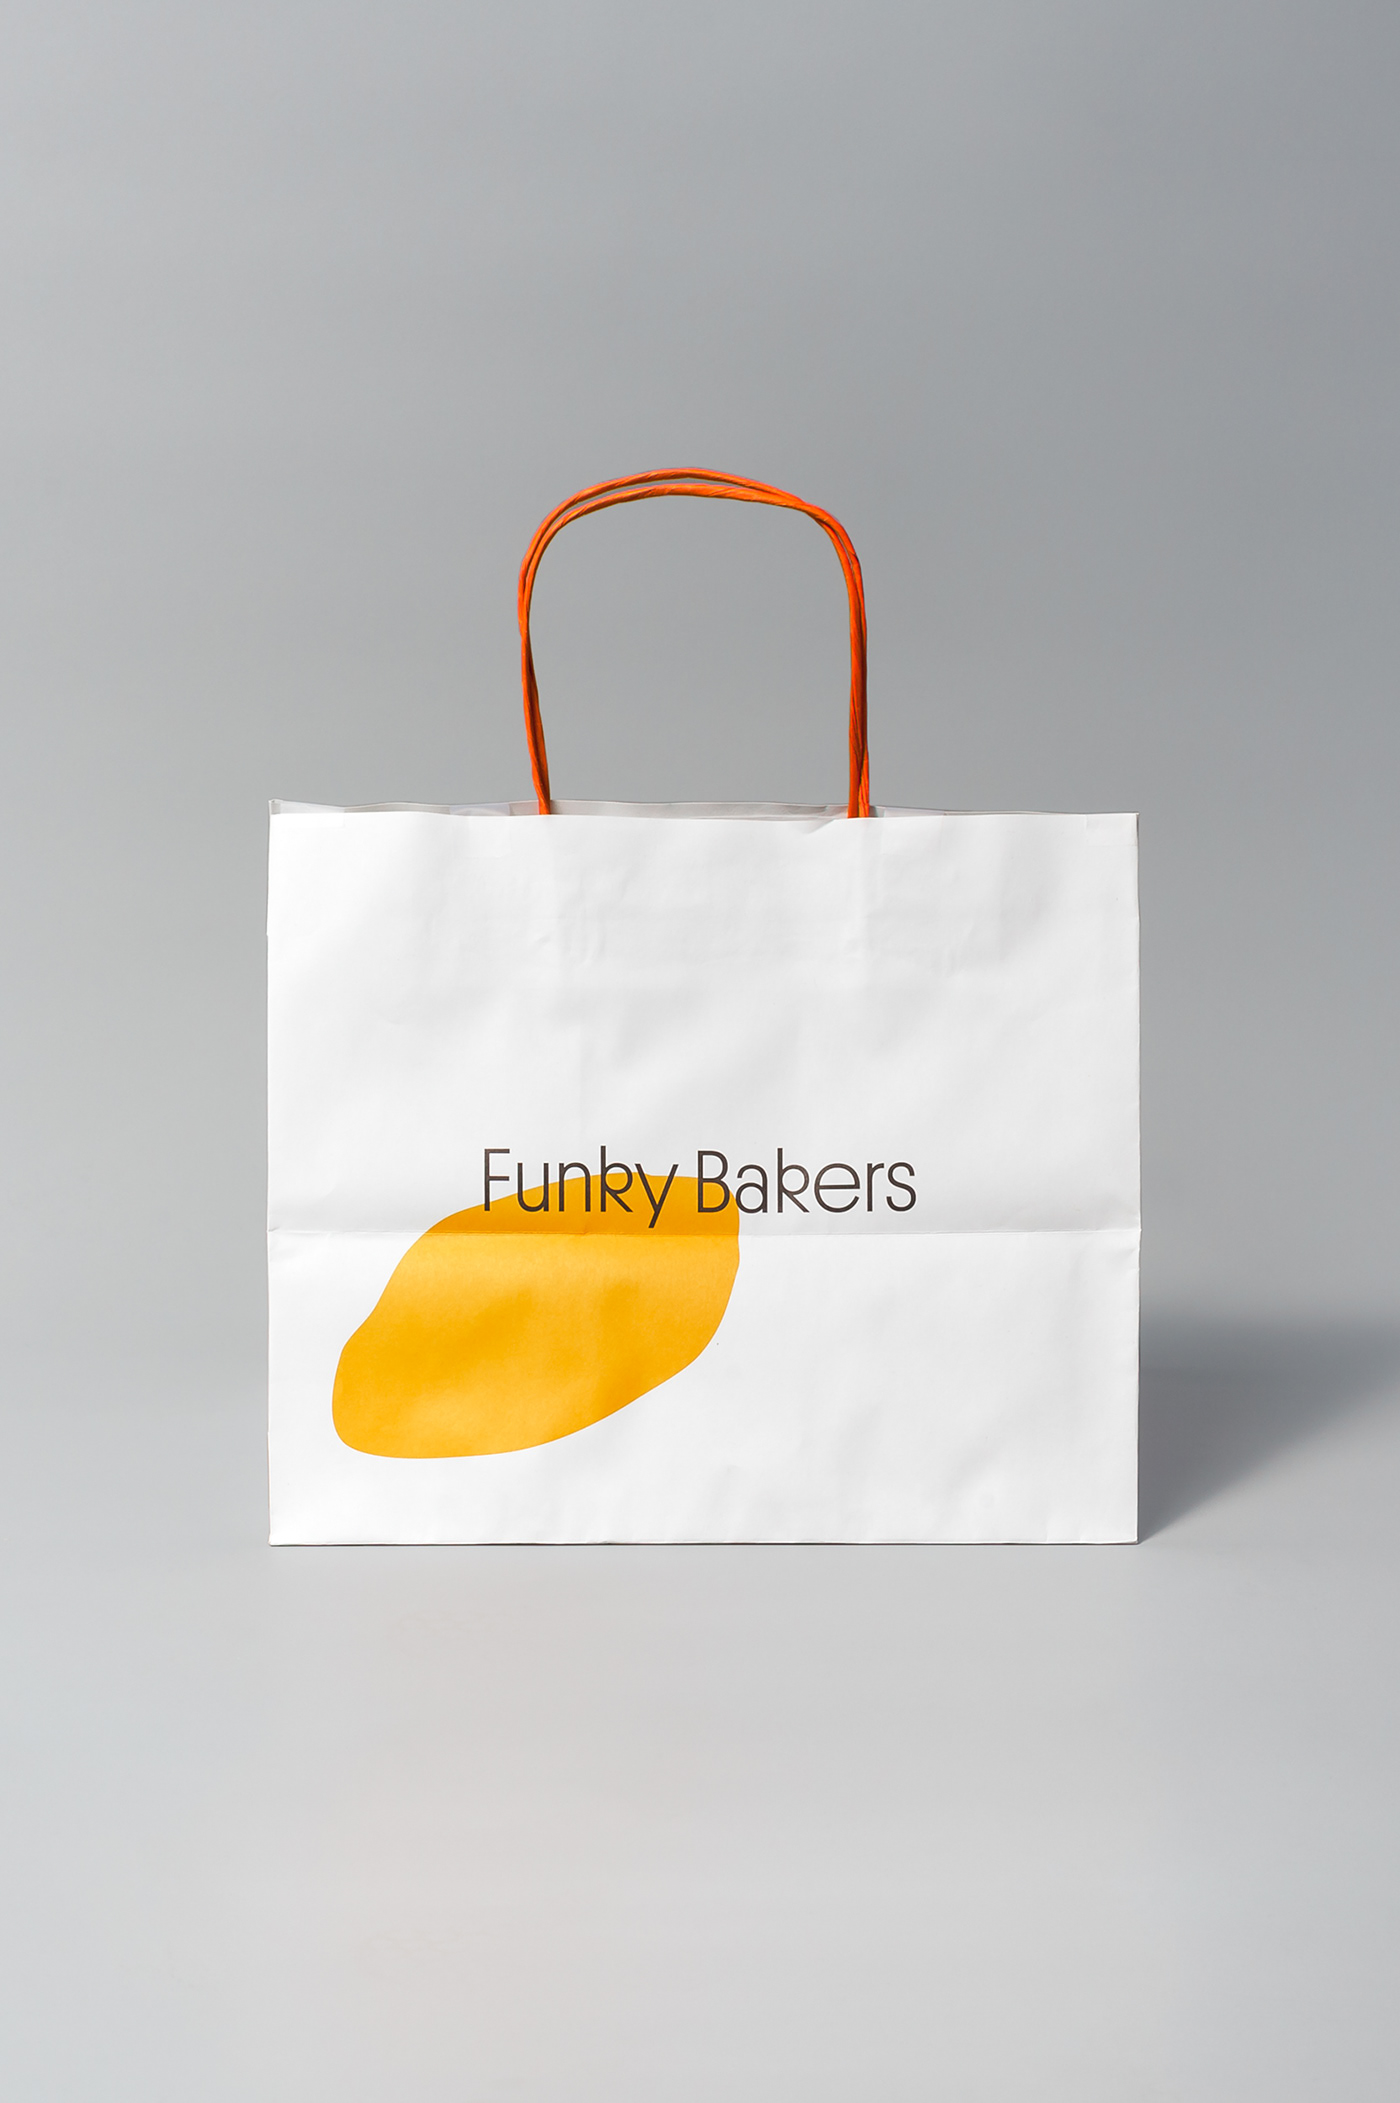 Funky Bakers面包店品牌VI设计